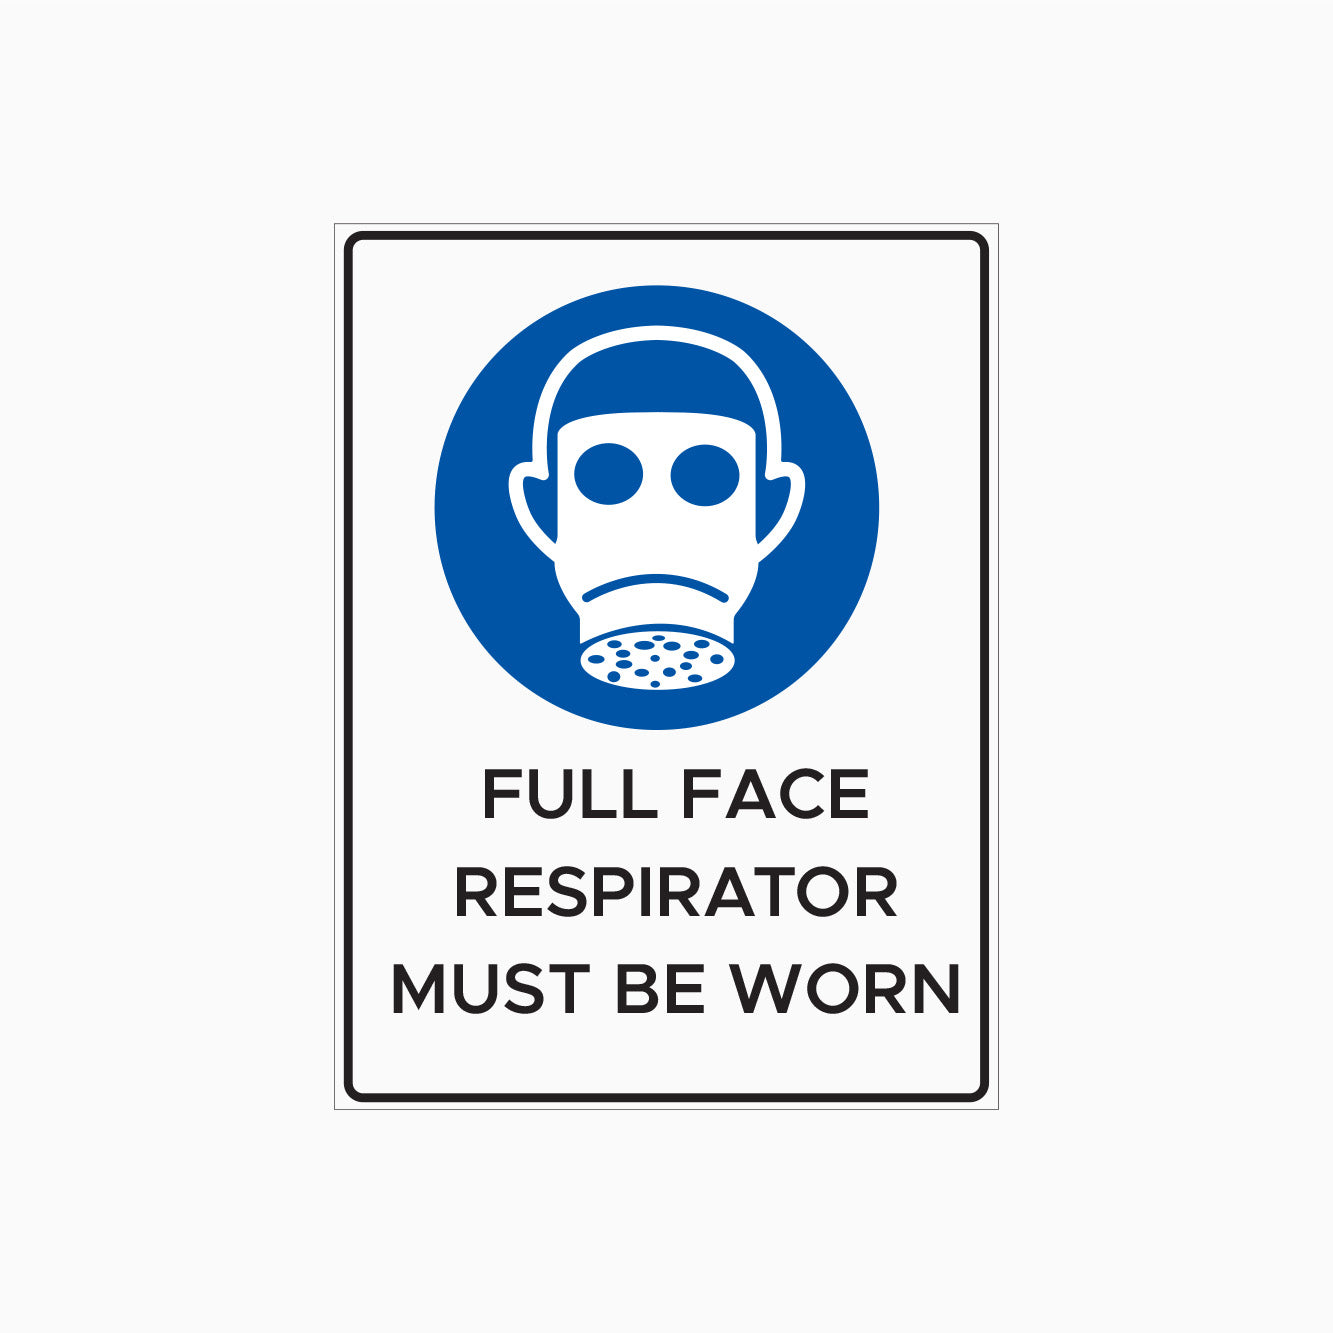 FULL FACE RESPIRATOR MUST BE WORN SIGN - PPE SIGN